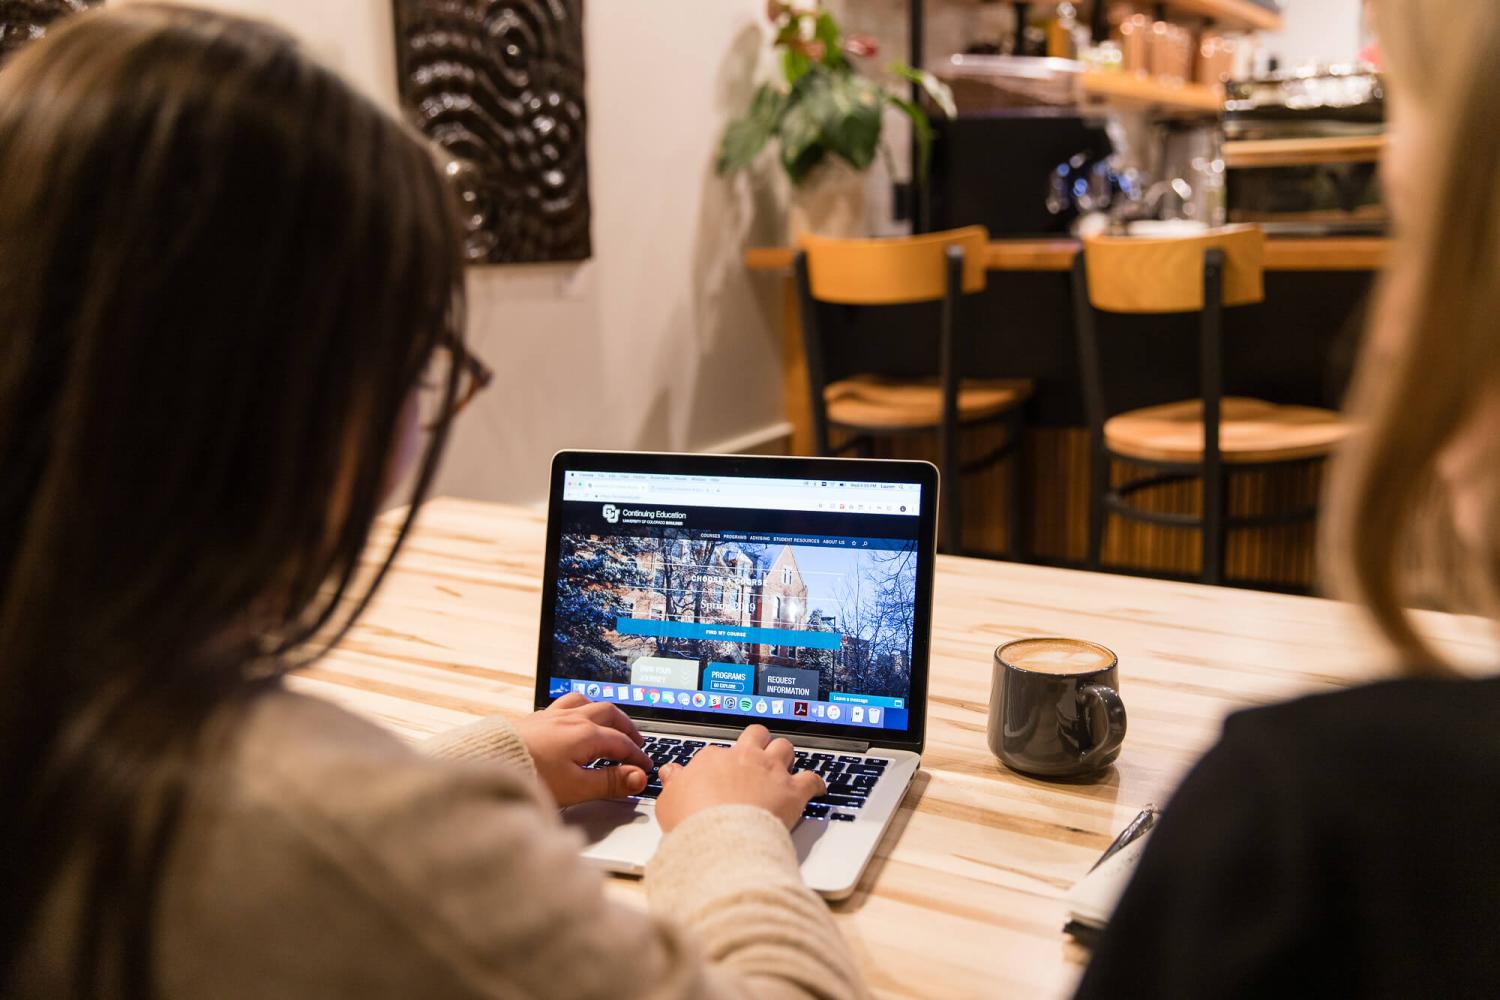 A student browses the Continuing Education website at a cafe with a coffee on her table